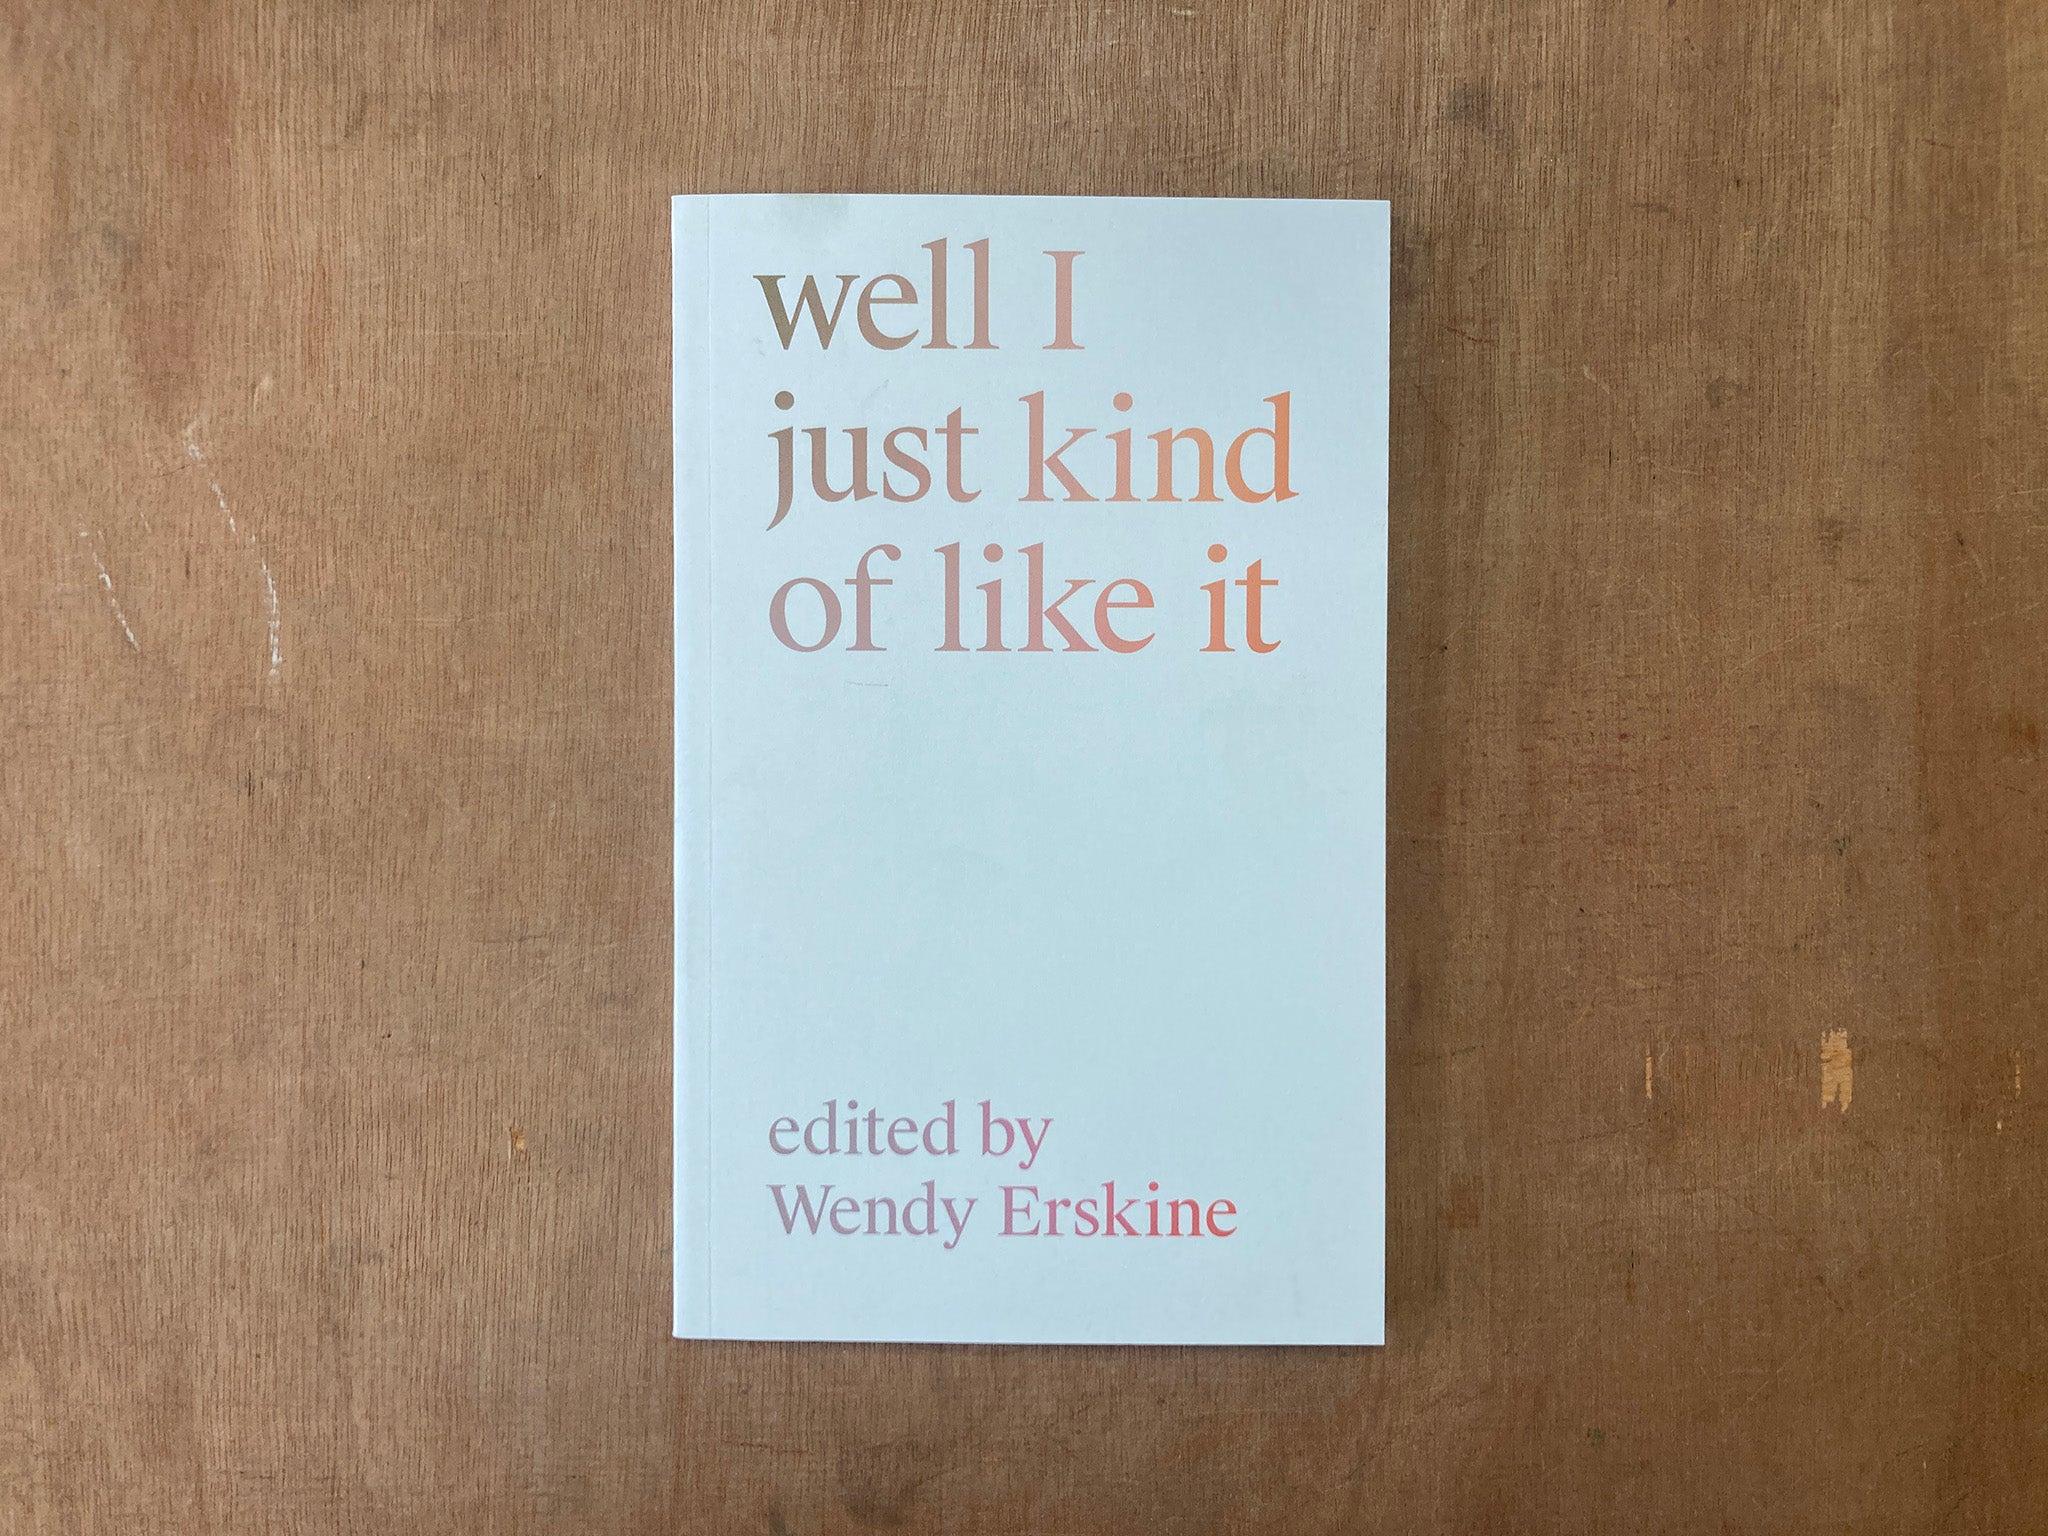 WELL I JUST KIND OF LIKE IT edited by Wendy Erskine